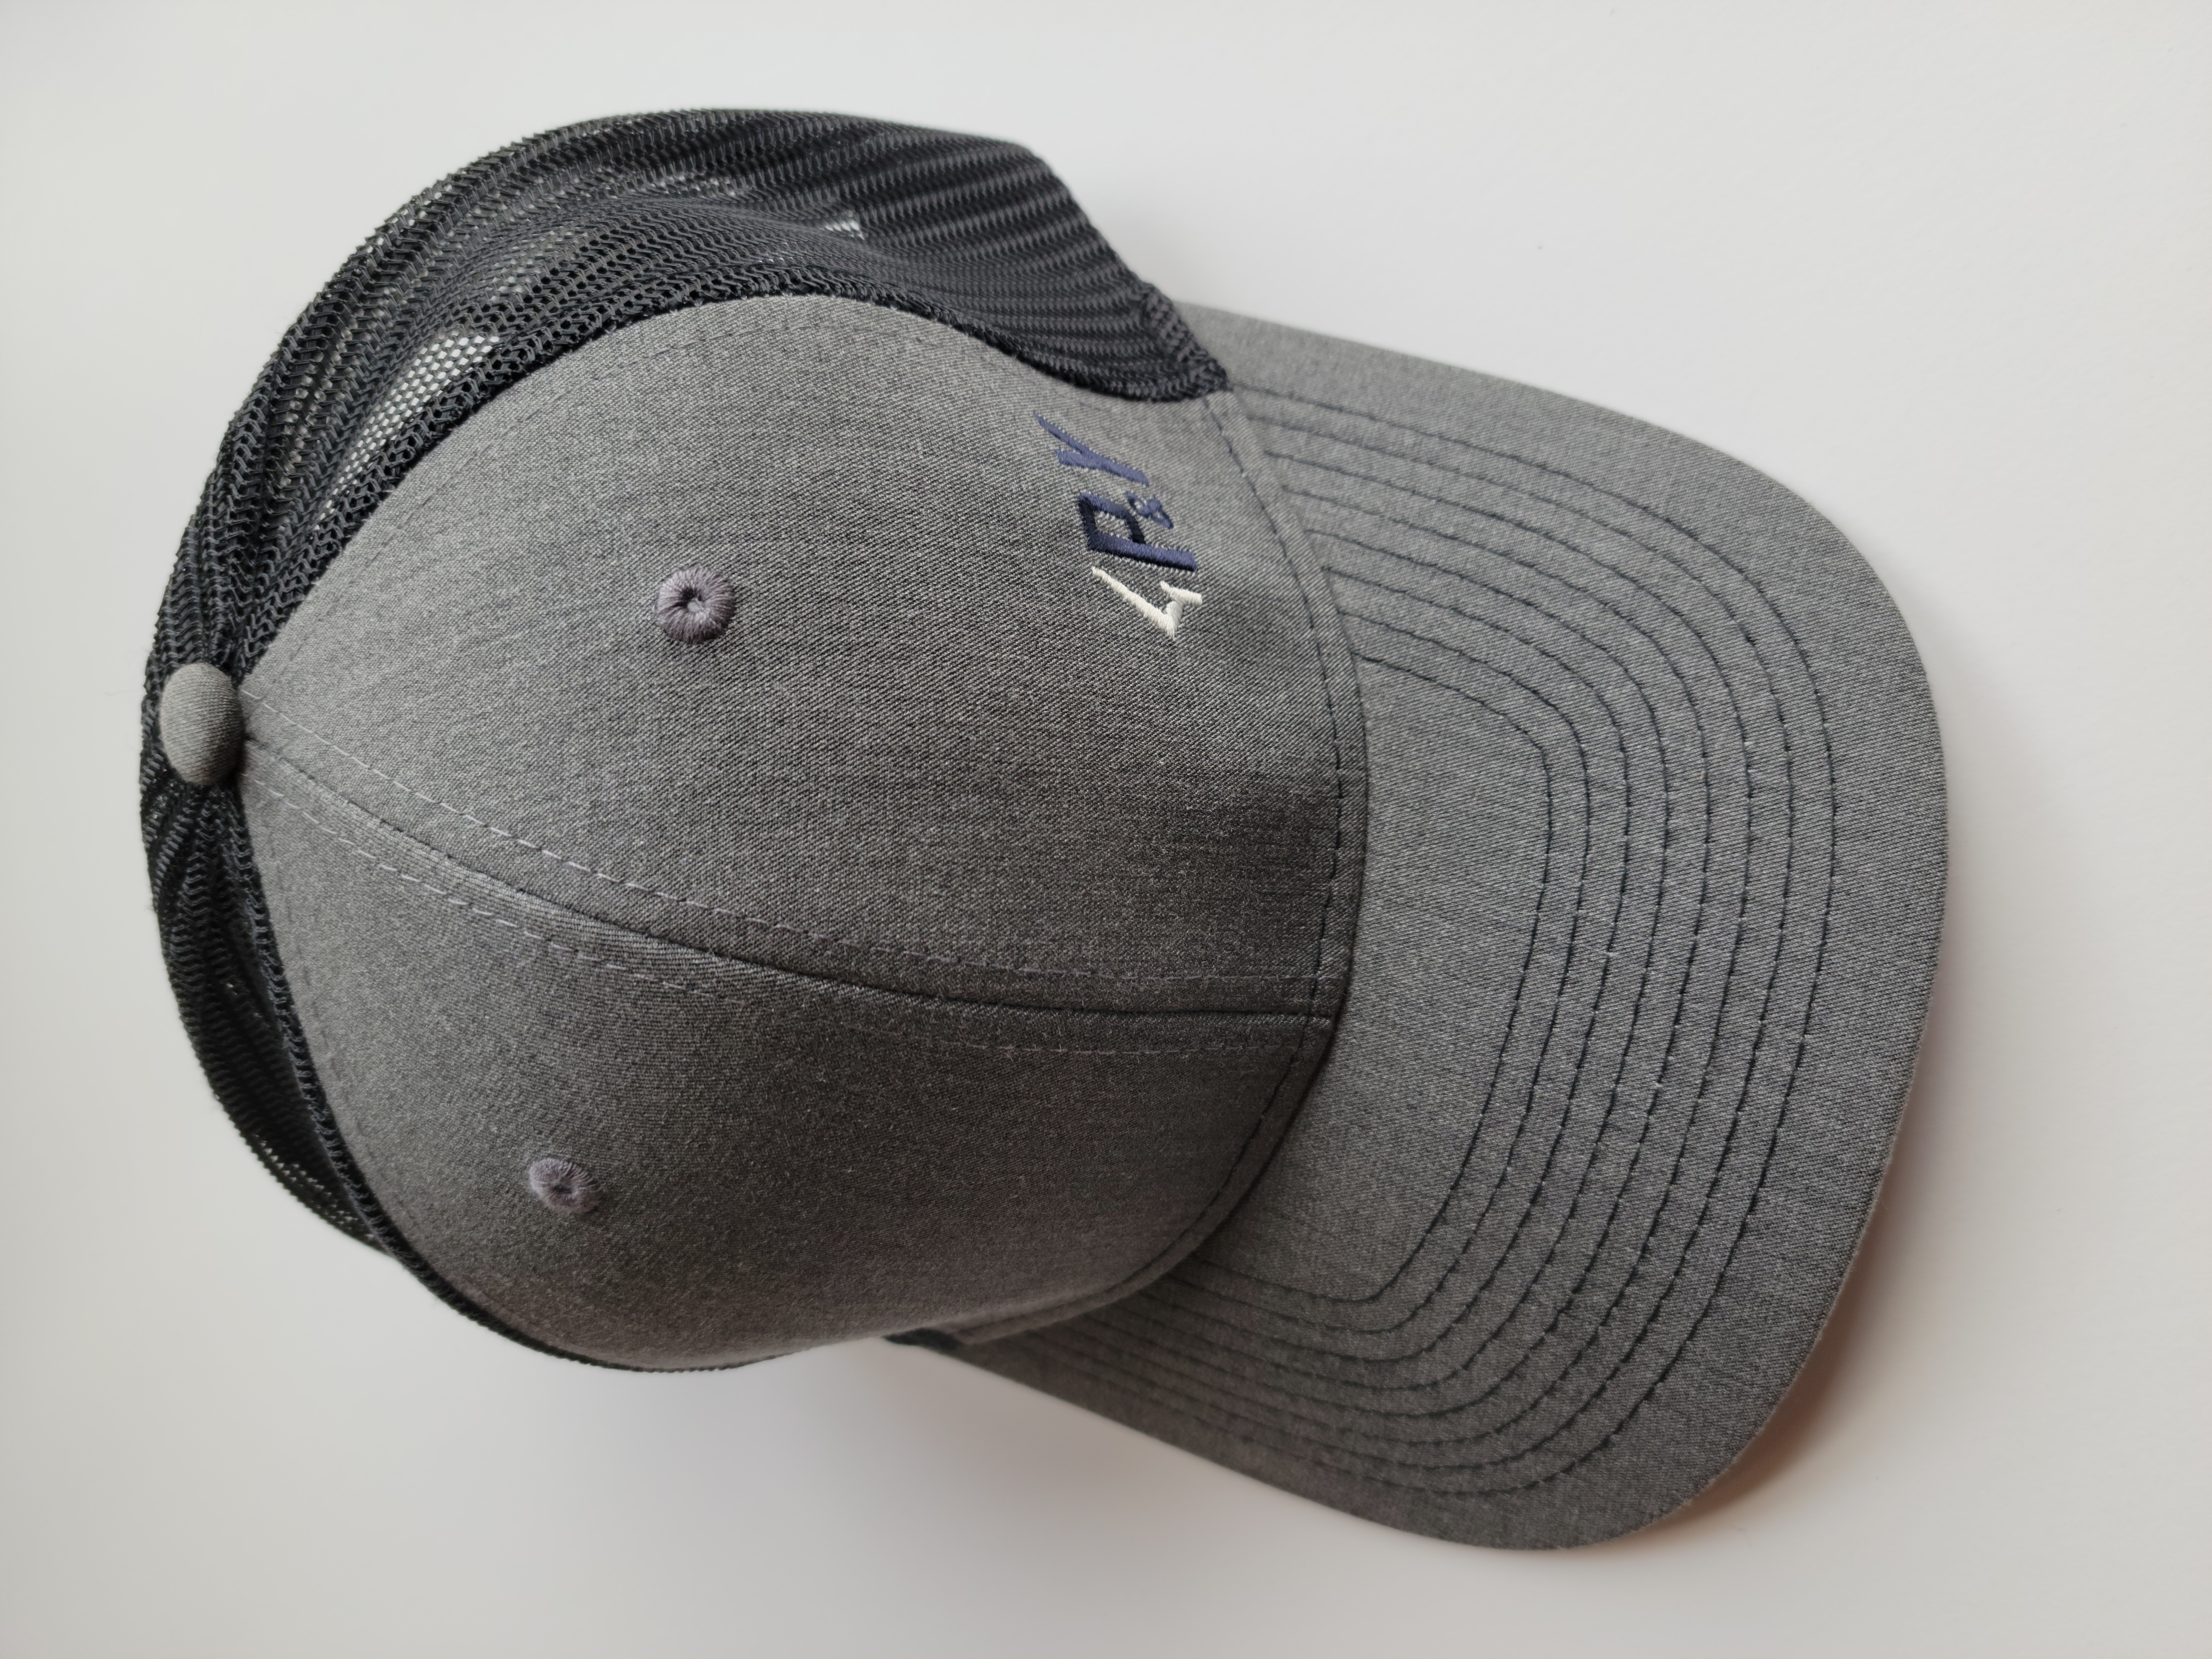 
Pope & Young Heathered Cotton Twill and Mesh Cap